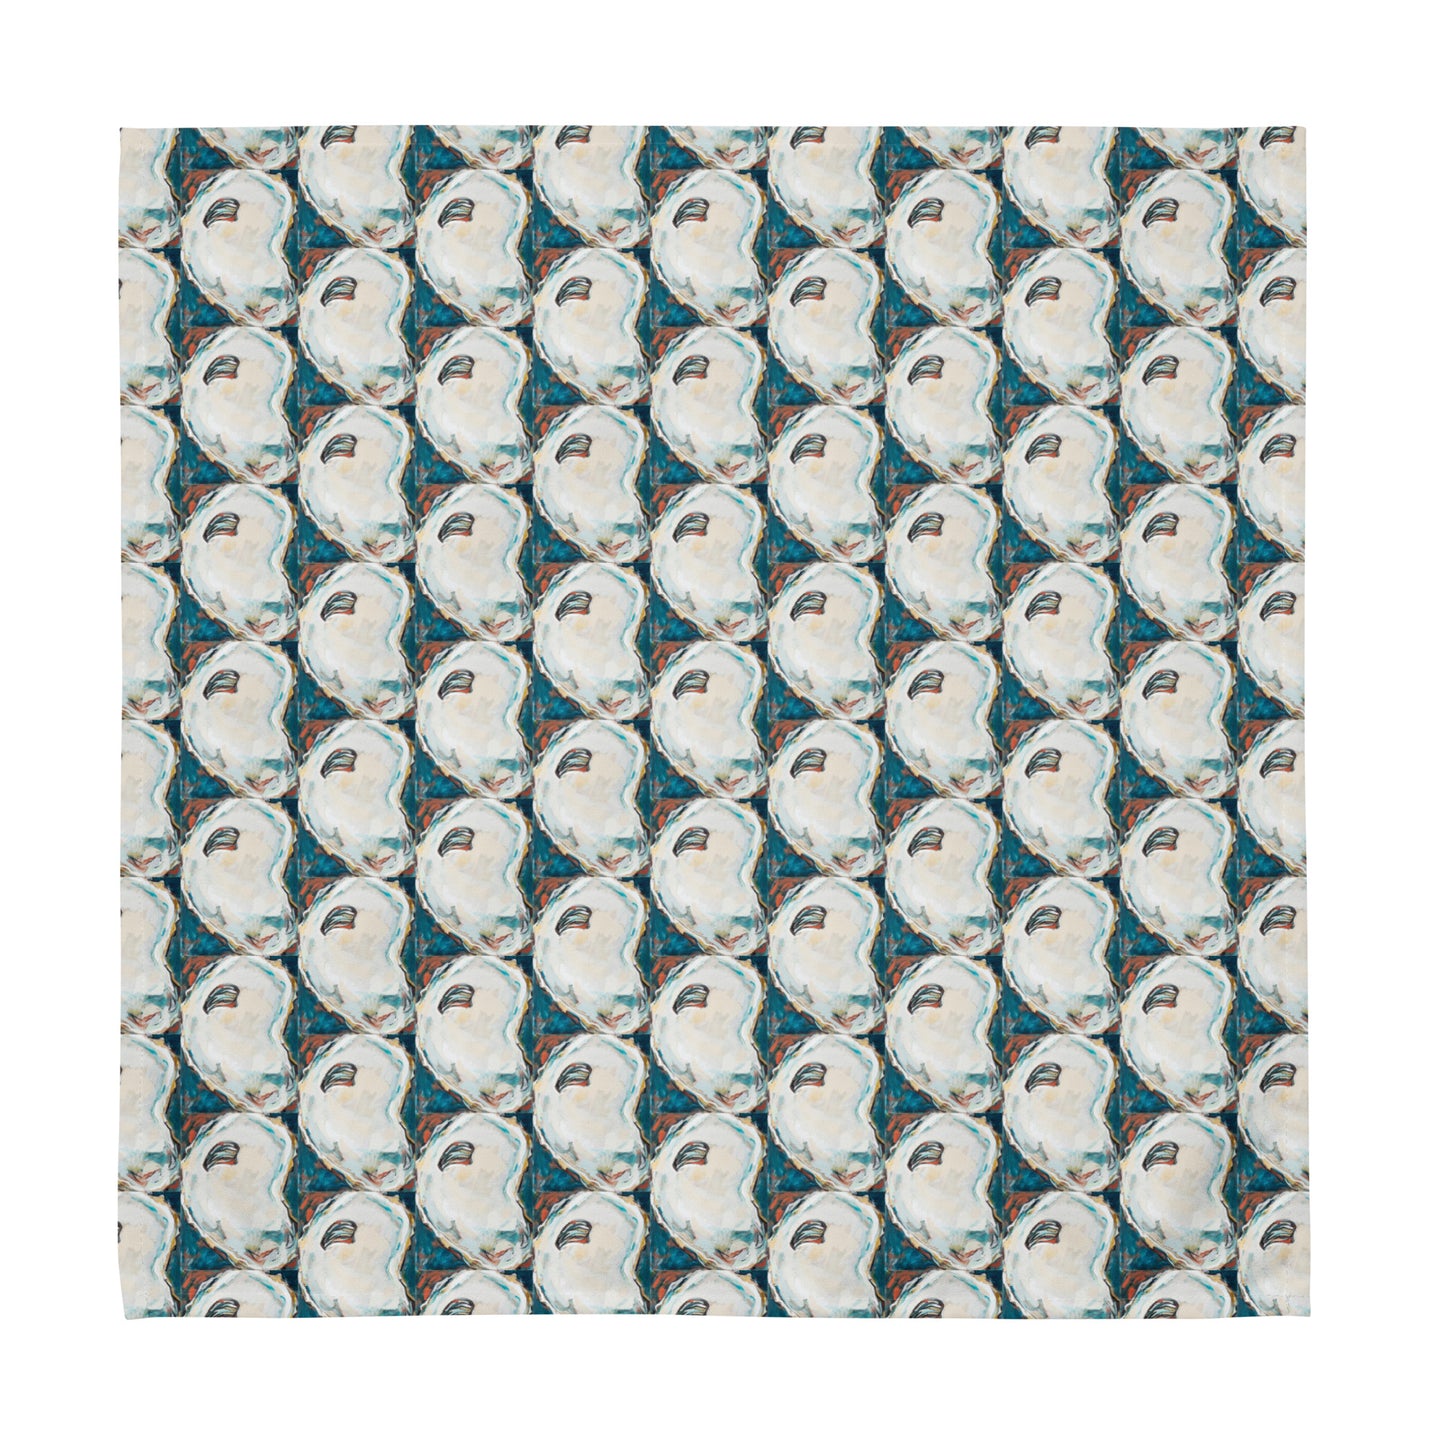 Chill Oysters Cloth napkin set